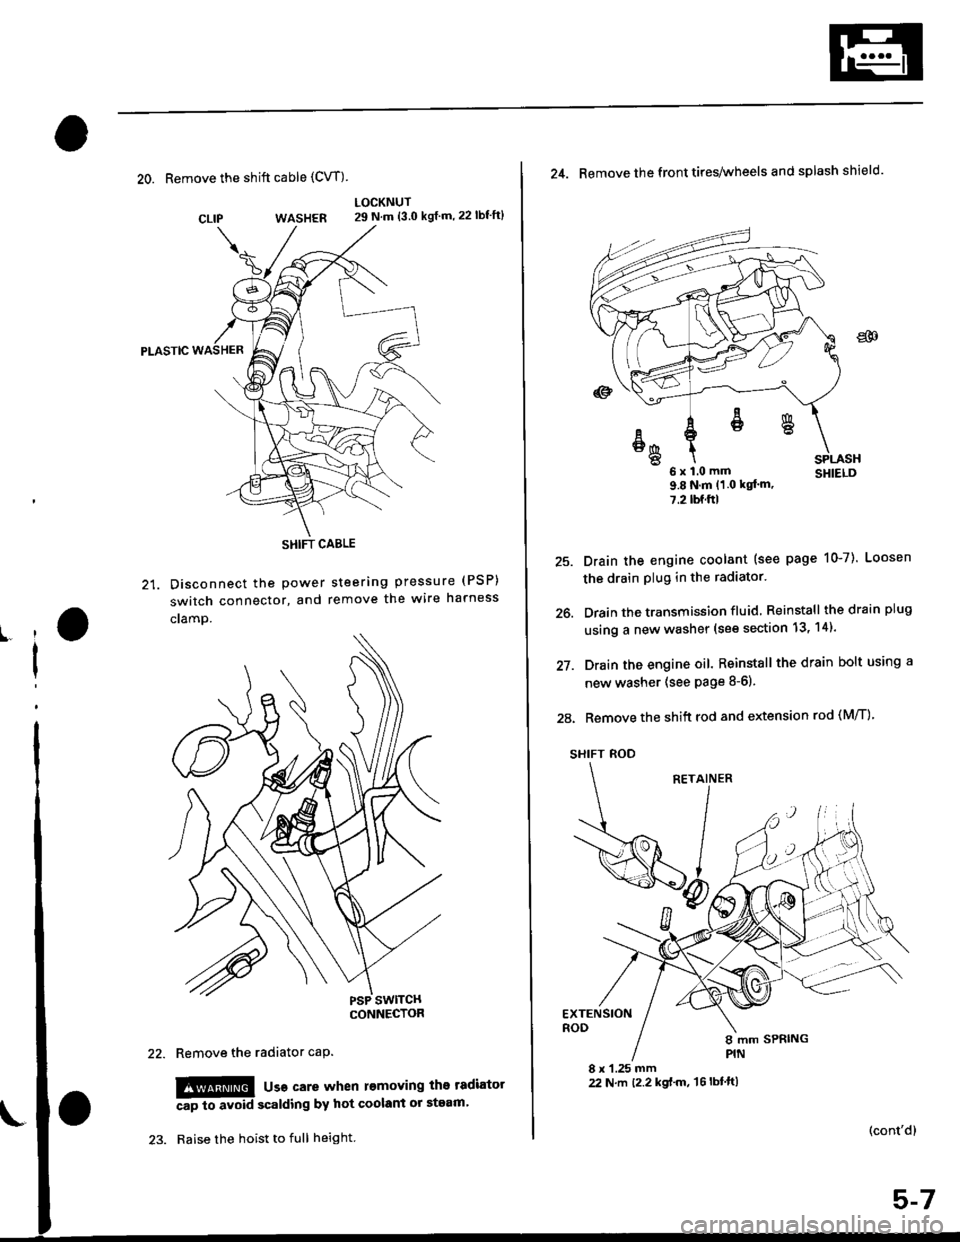 HONDA CIVIC 1998 6.G User Guide 20. Remove the shift cable (CVT)
WASHER
Pt-Aslc
21. Disconnect the Power
switch connector, and
cramp.
LOCKNUT29 N.m {3.0 kgf m,22lbfft}
steering pressure (PSP)
remove the wire harness
CLIP
ll
I
Remov